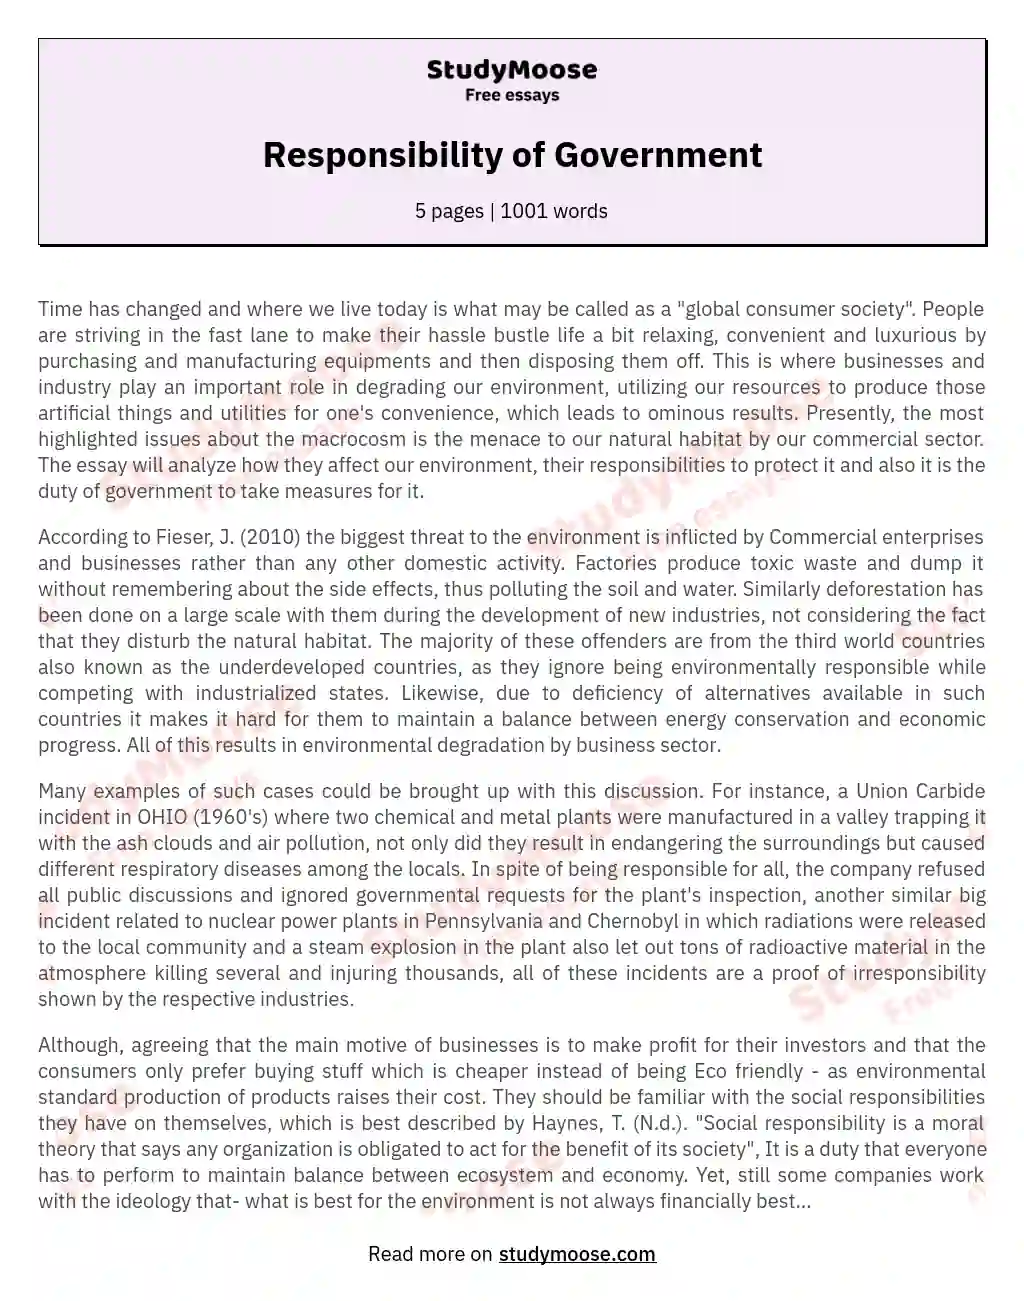 essay on the responsibility of government